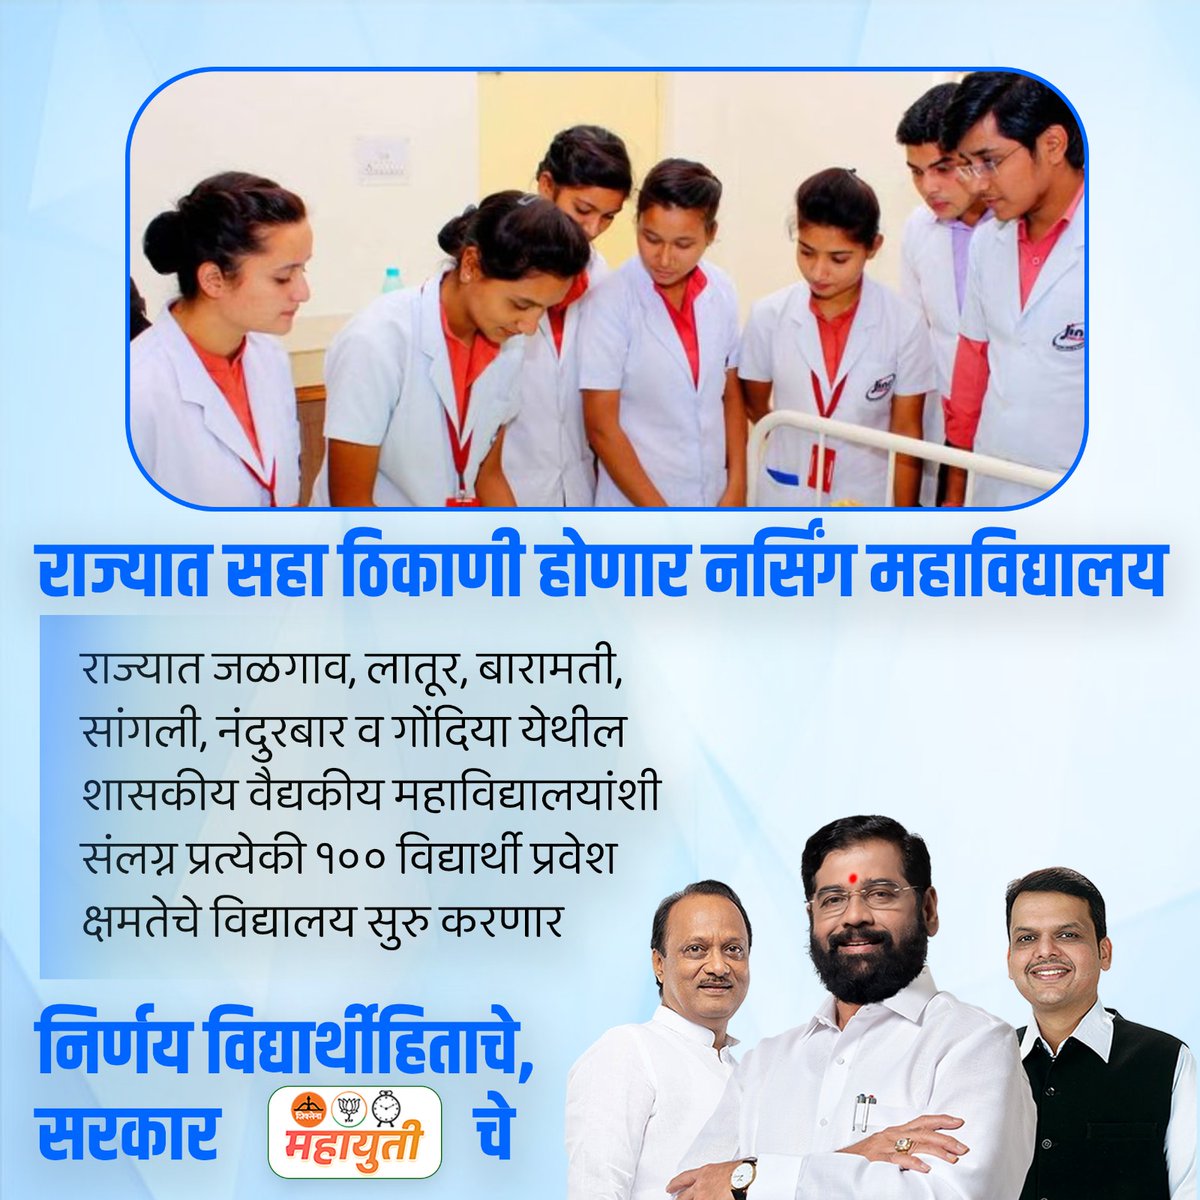 The decision to establish nursing colleges in six places will not only create opportunities for aspiring nurses but also strengthen the healthcare system in Jalgaon, Latur, Baramati, Sangli, Nandurbar, and Gondia.